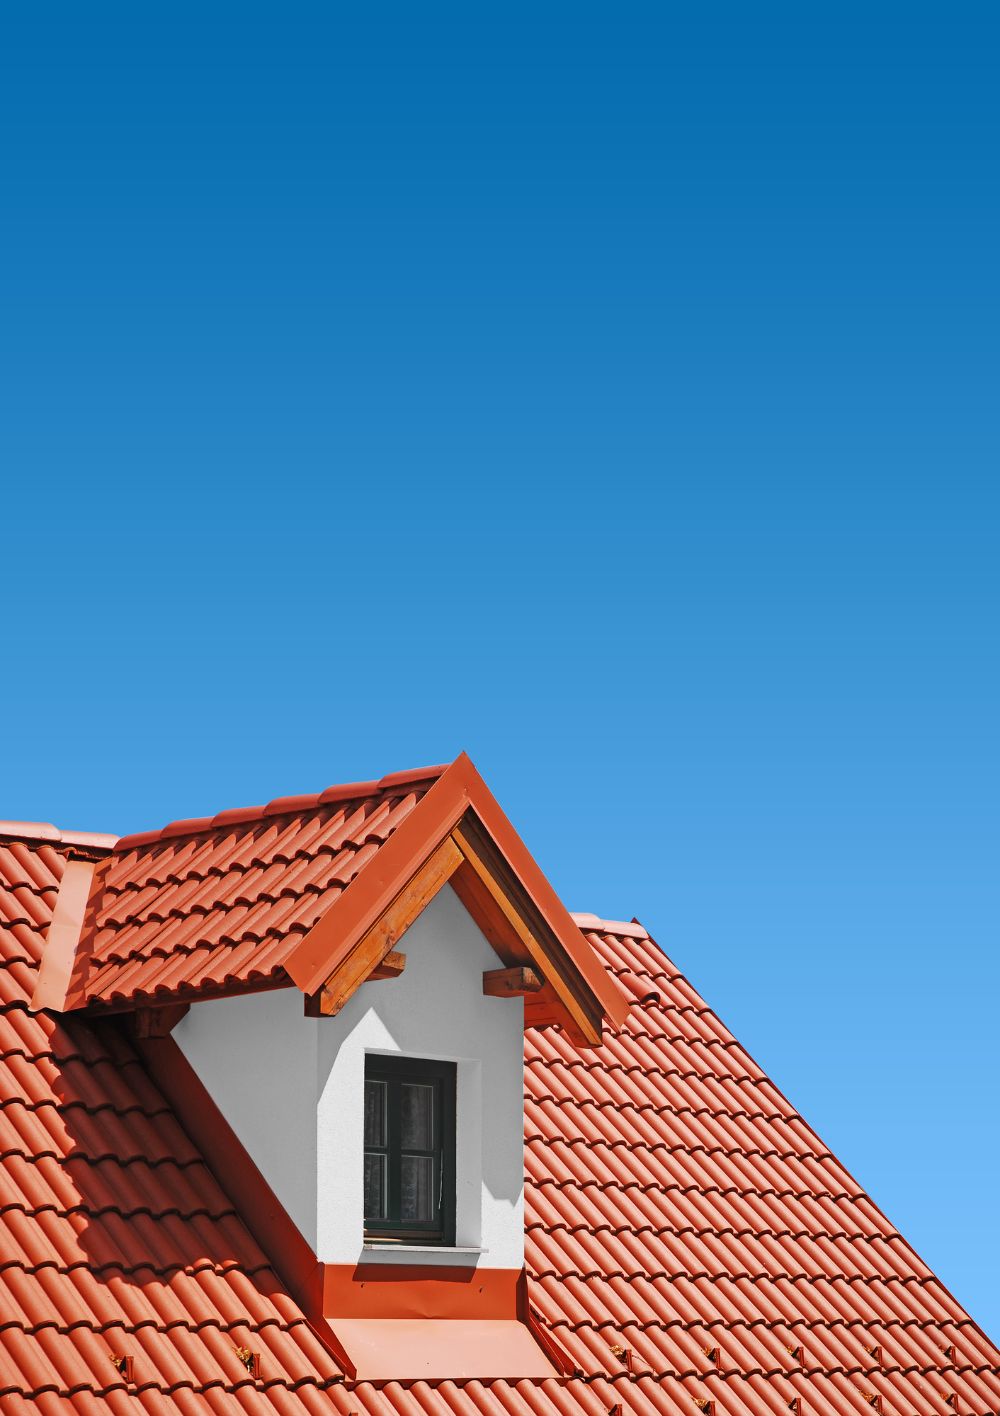 What are the benefits of cleaning your roof with no pressure at all